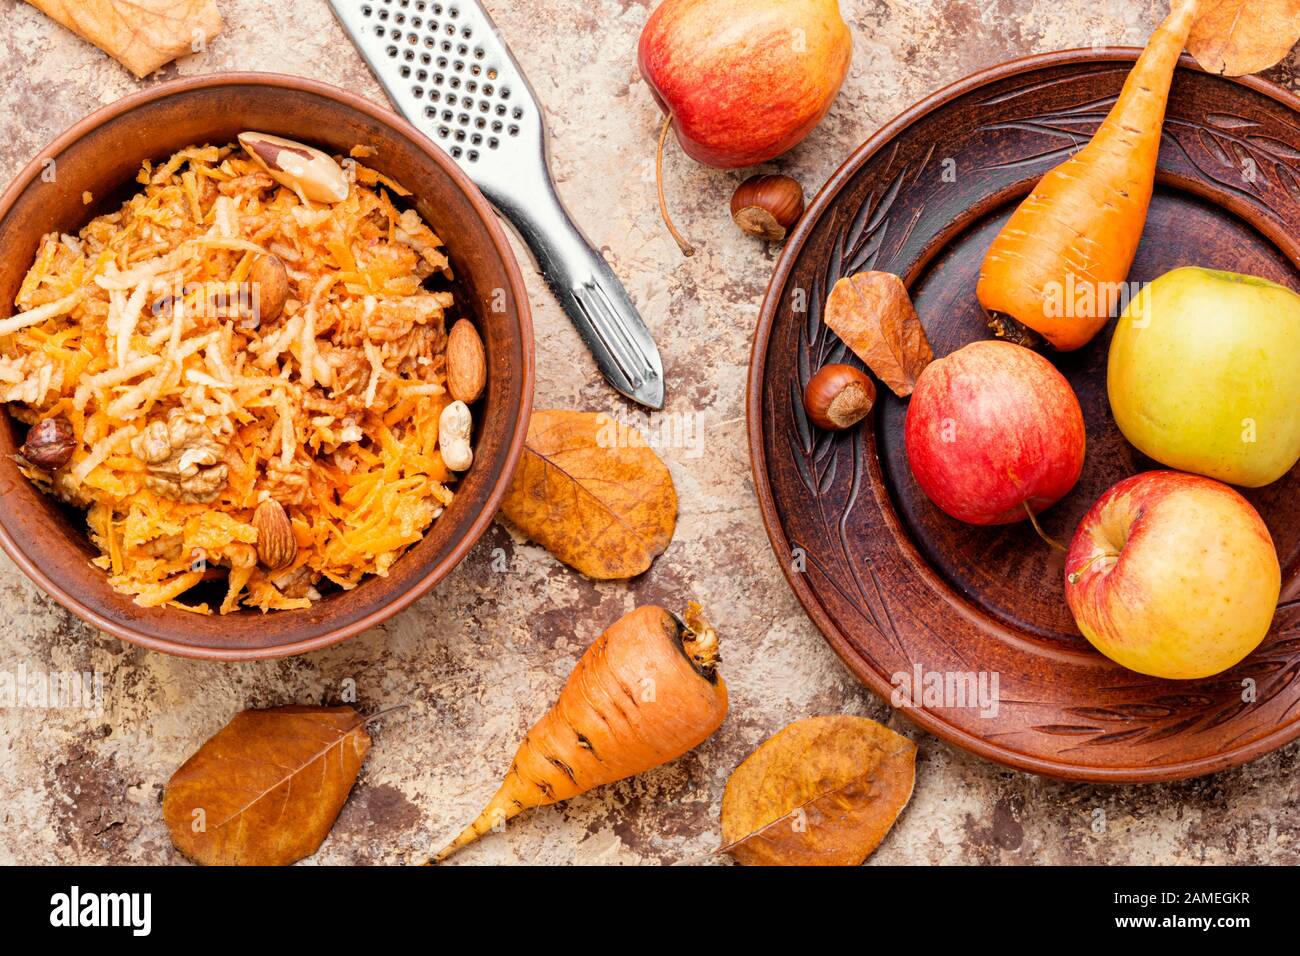 Seasonal autumn salad, grated apples with carrots. Stock Photo